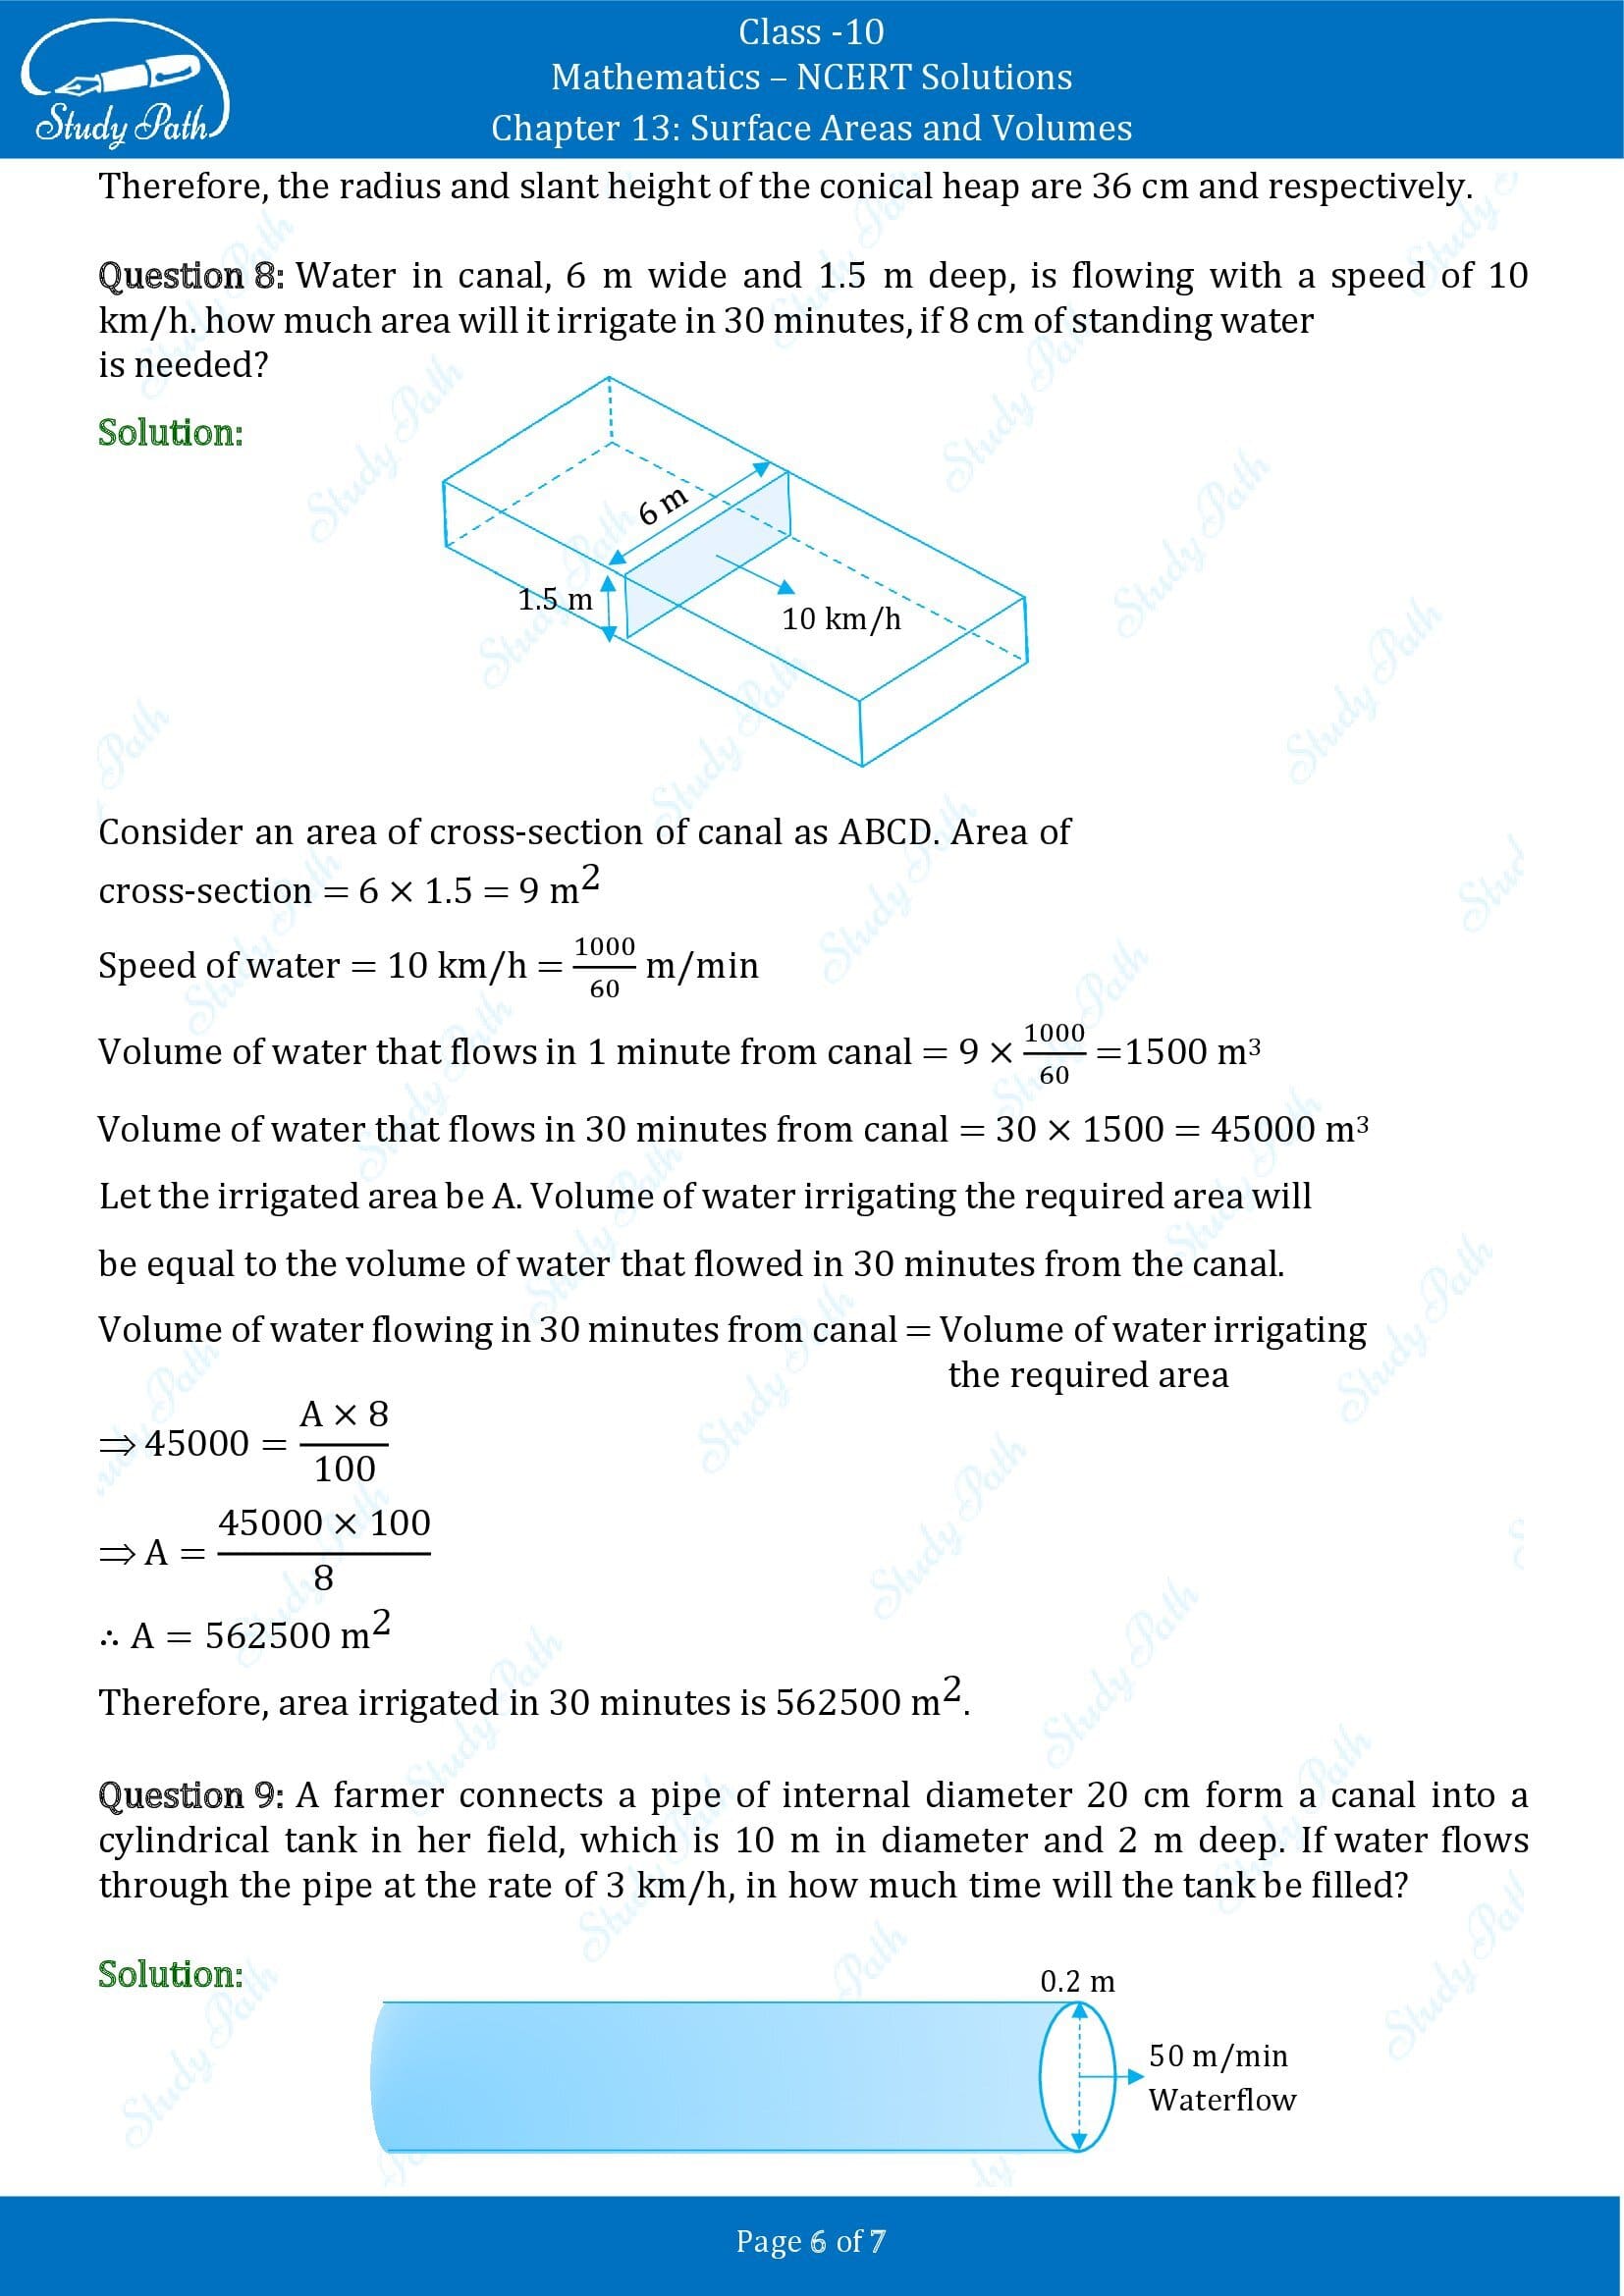 NCERT Solutions for Class 10 Maths Chapter 13 Surface Areas and Volumes Exercise 13.3 00006